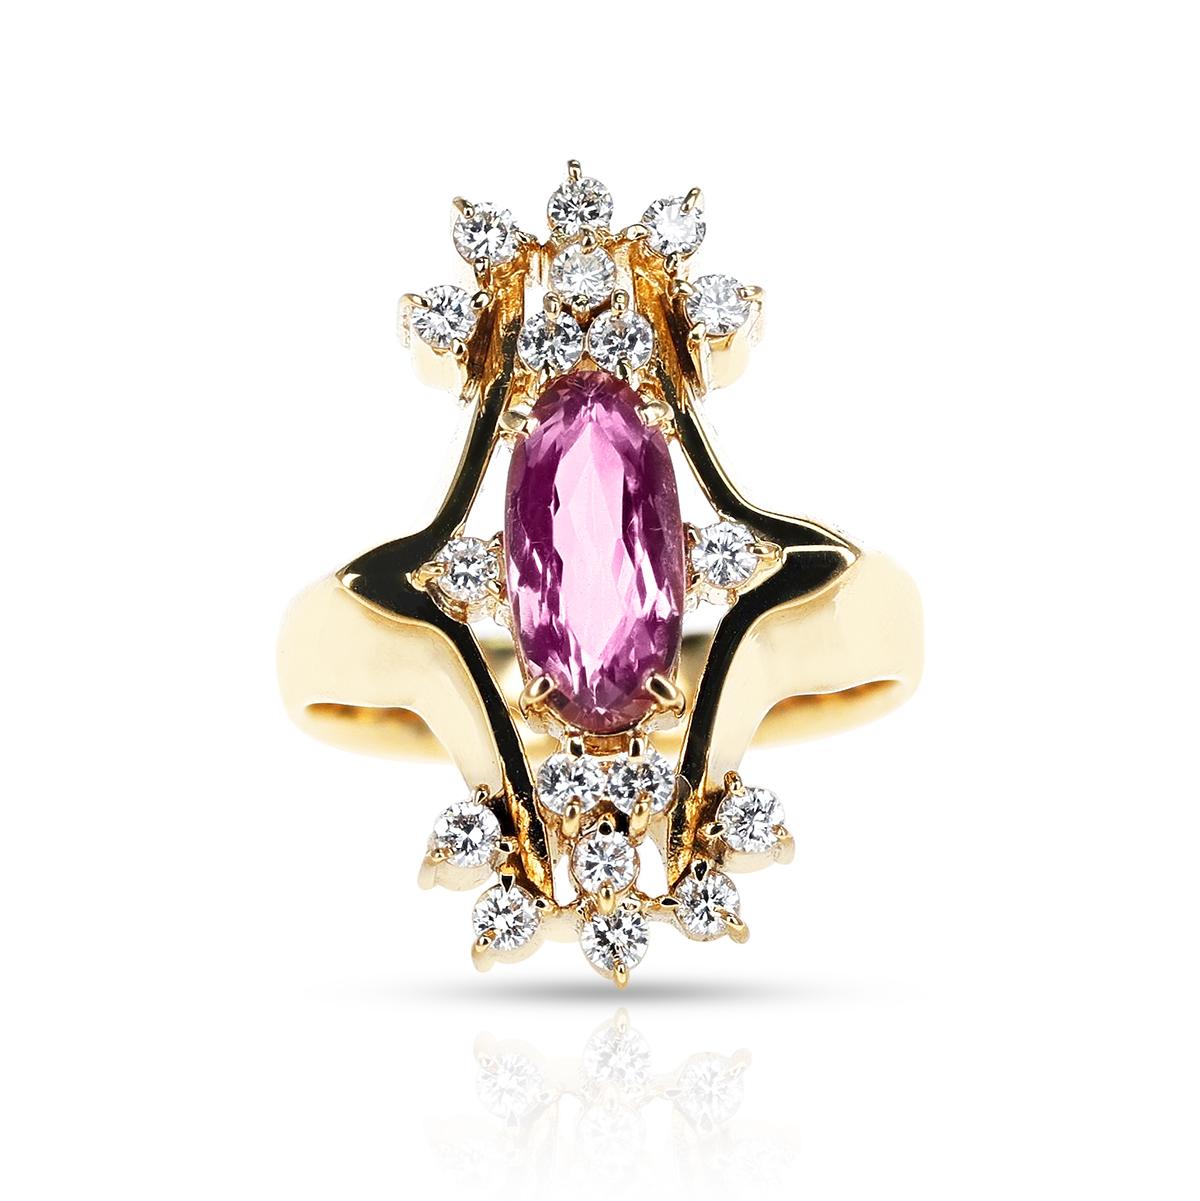 An Elongated Oval Pink Topaz and Diamond Cocktail Ring made in 18 Karat Yellow Gold.  The pink topaz weighs appx. 1.50 carats and the diamonds weigh appx. 0.45 carats. The ring size is US 7. The total weight of the ring is 12.50 grams. 